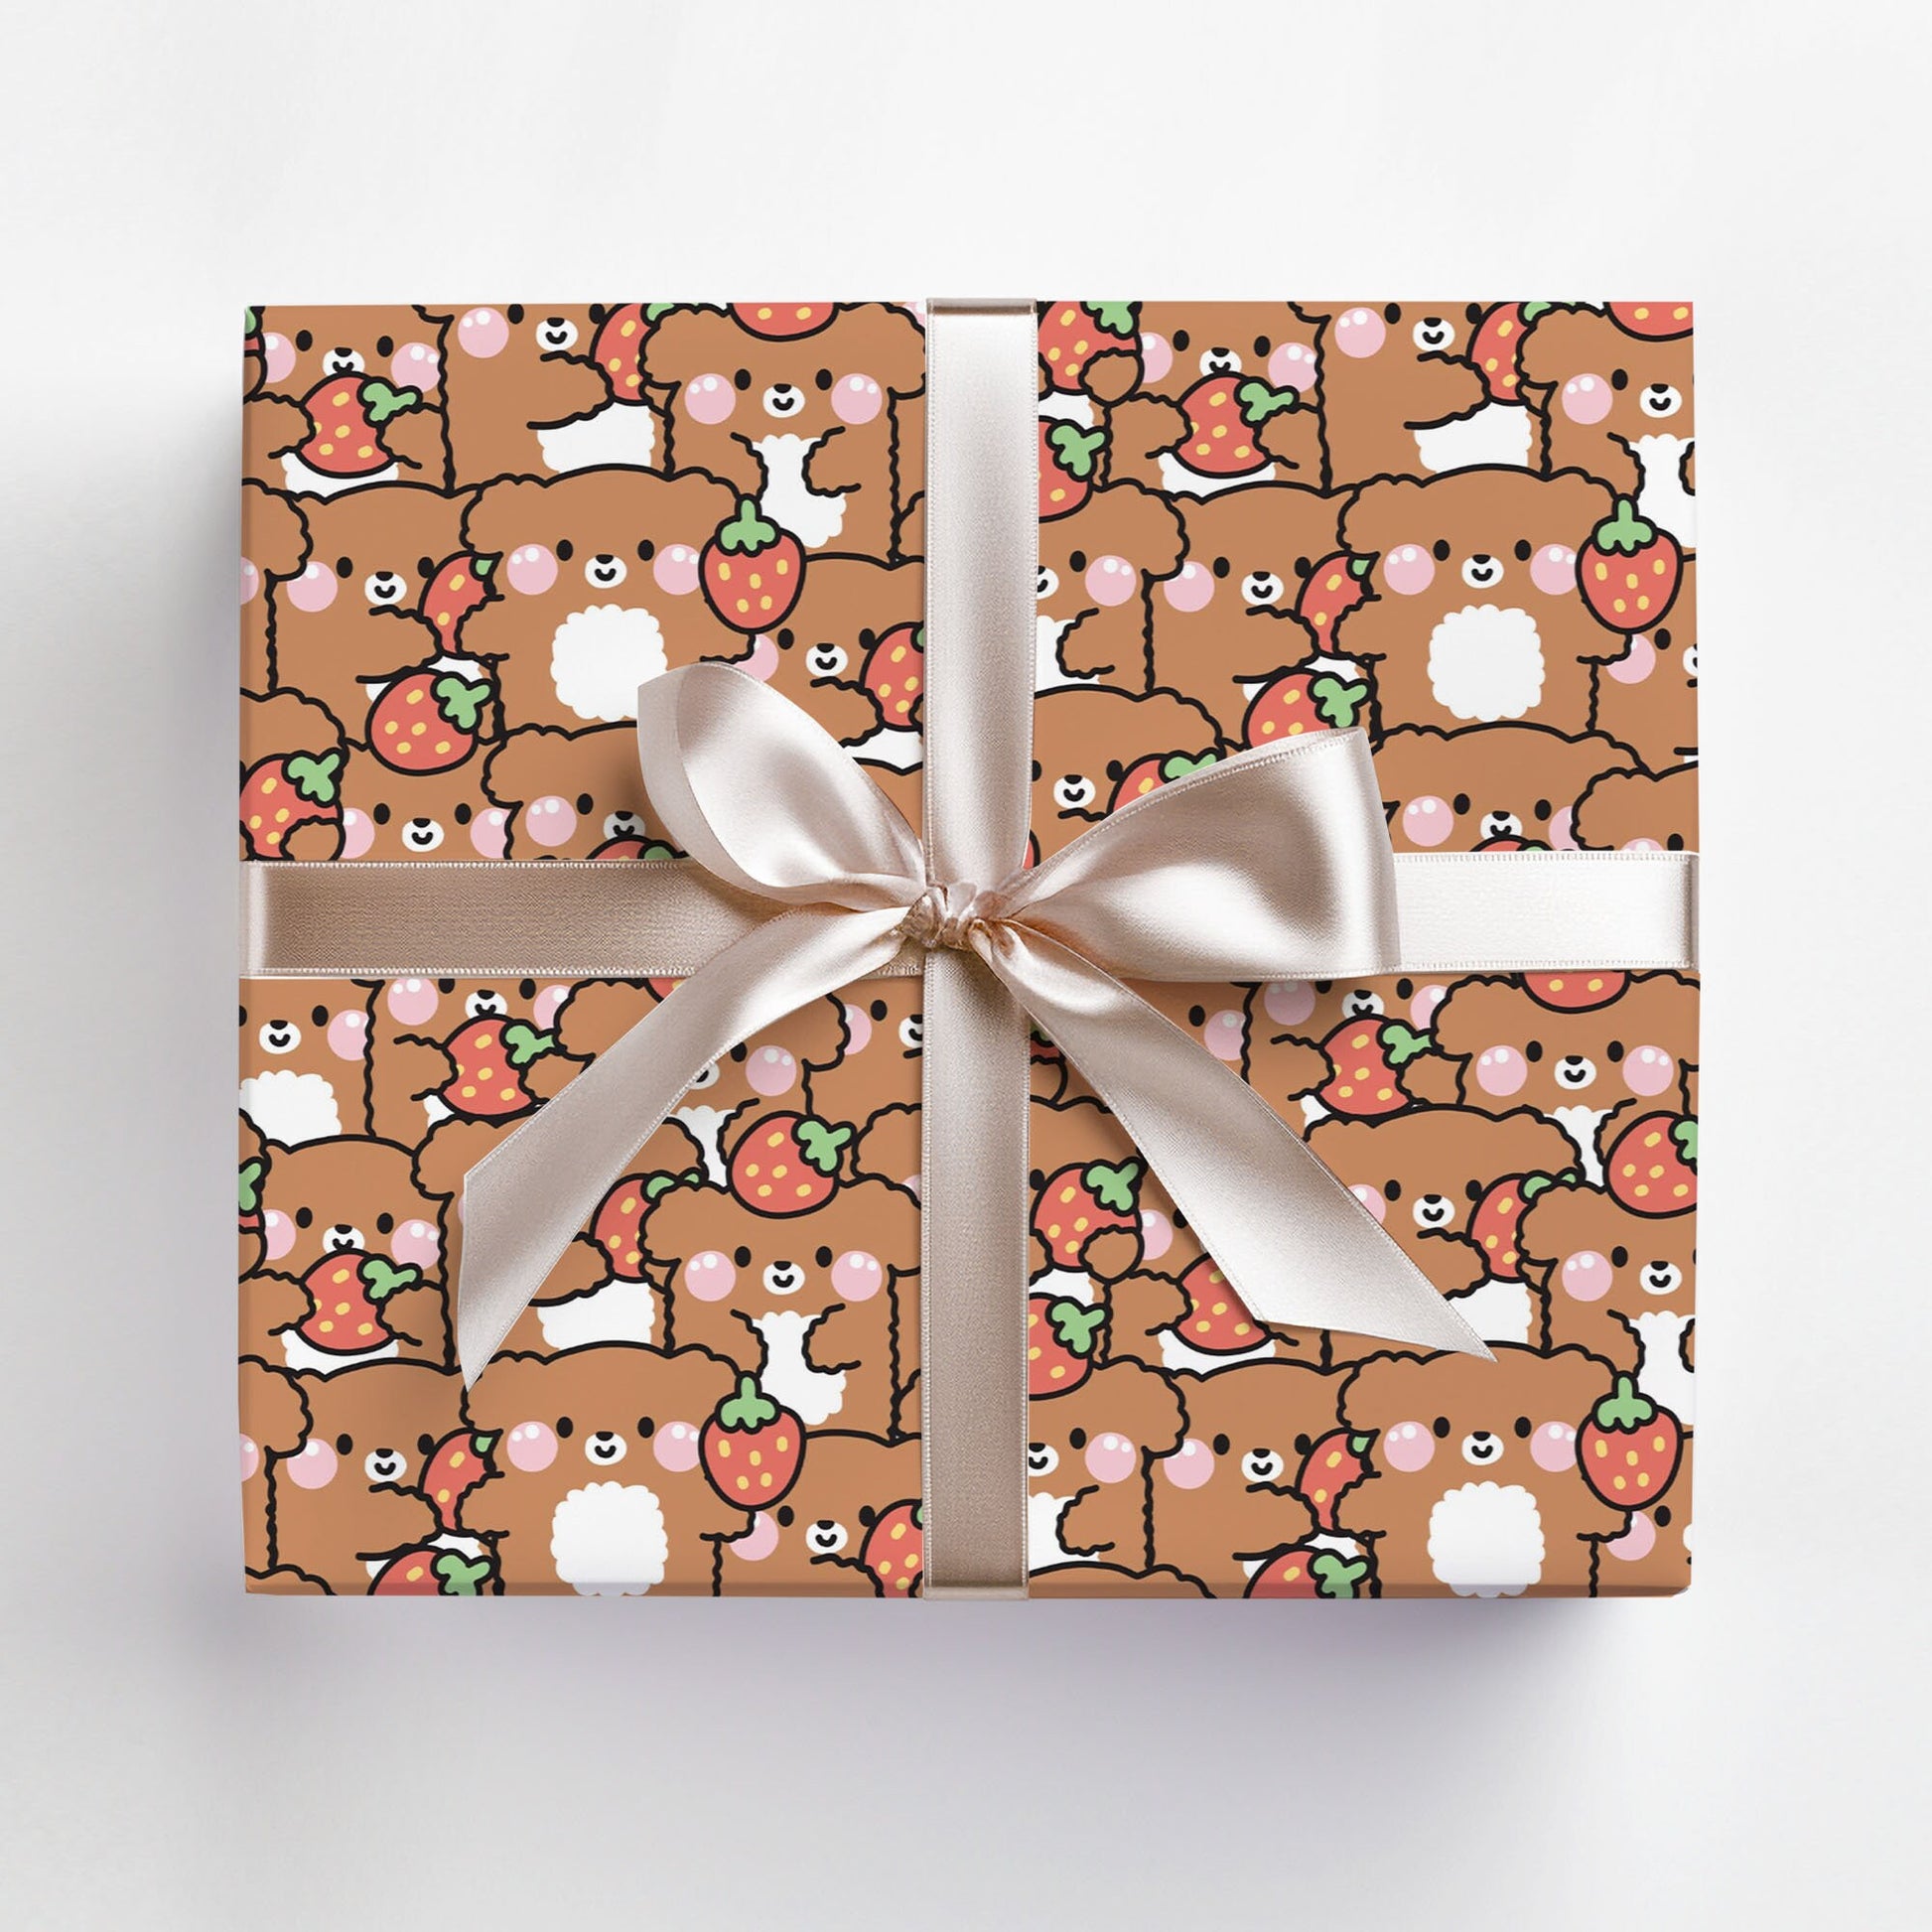 Kawaii Dog Teddy Wrapping Paper, Birthday Wrapping Paper, Cute Gift Wrap, Strawberry Animal Kids Gift Present Paper Roll for Her